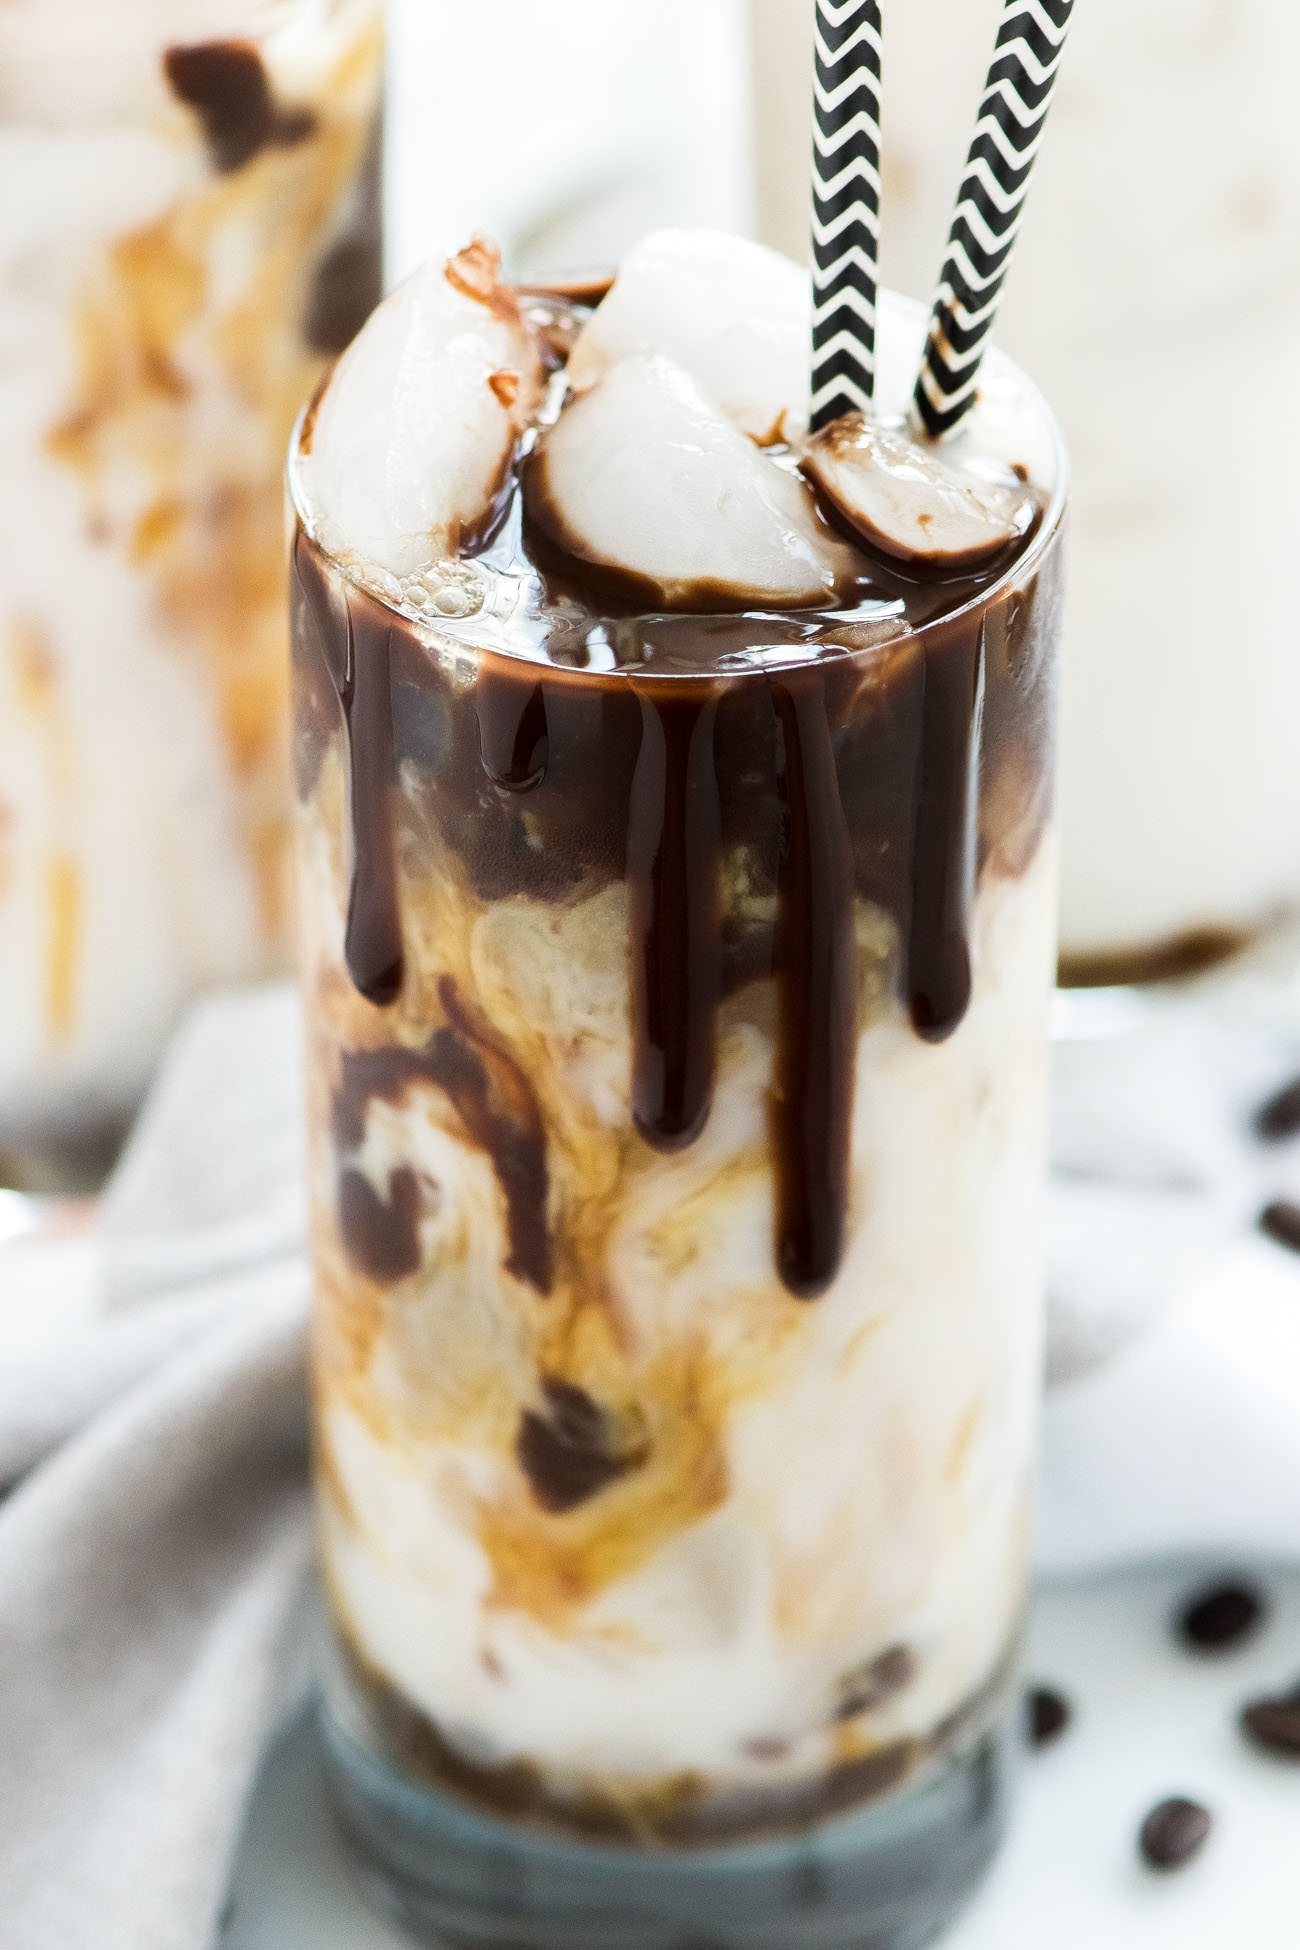 Iced Coconut Milk Mocha Macchiato is just how I want to start each day or give my afternoon a java jolt! Creamy coconut milk swirled with rich chocolate and topped with espresso. So fancy you will be calling yourself a barista!